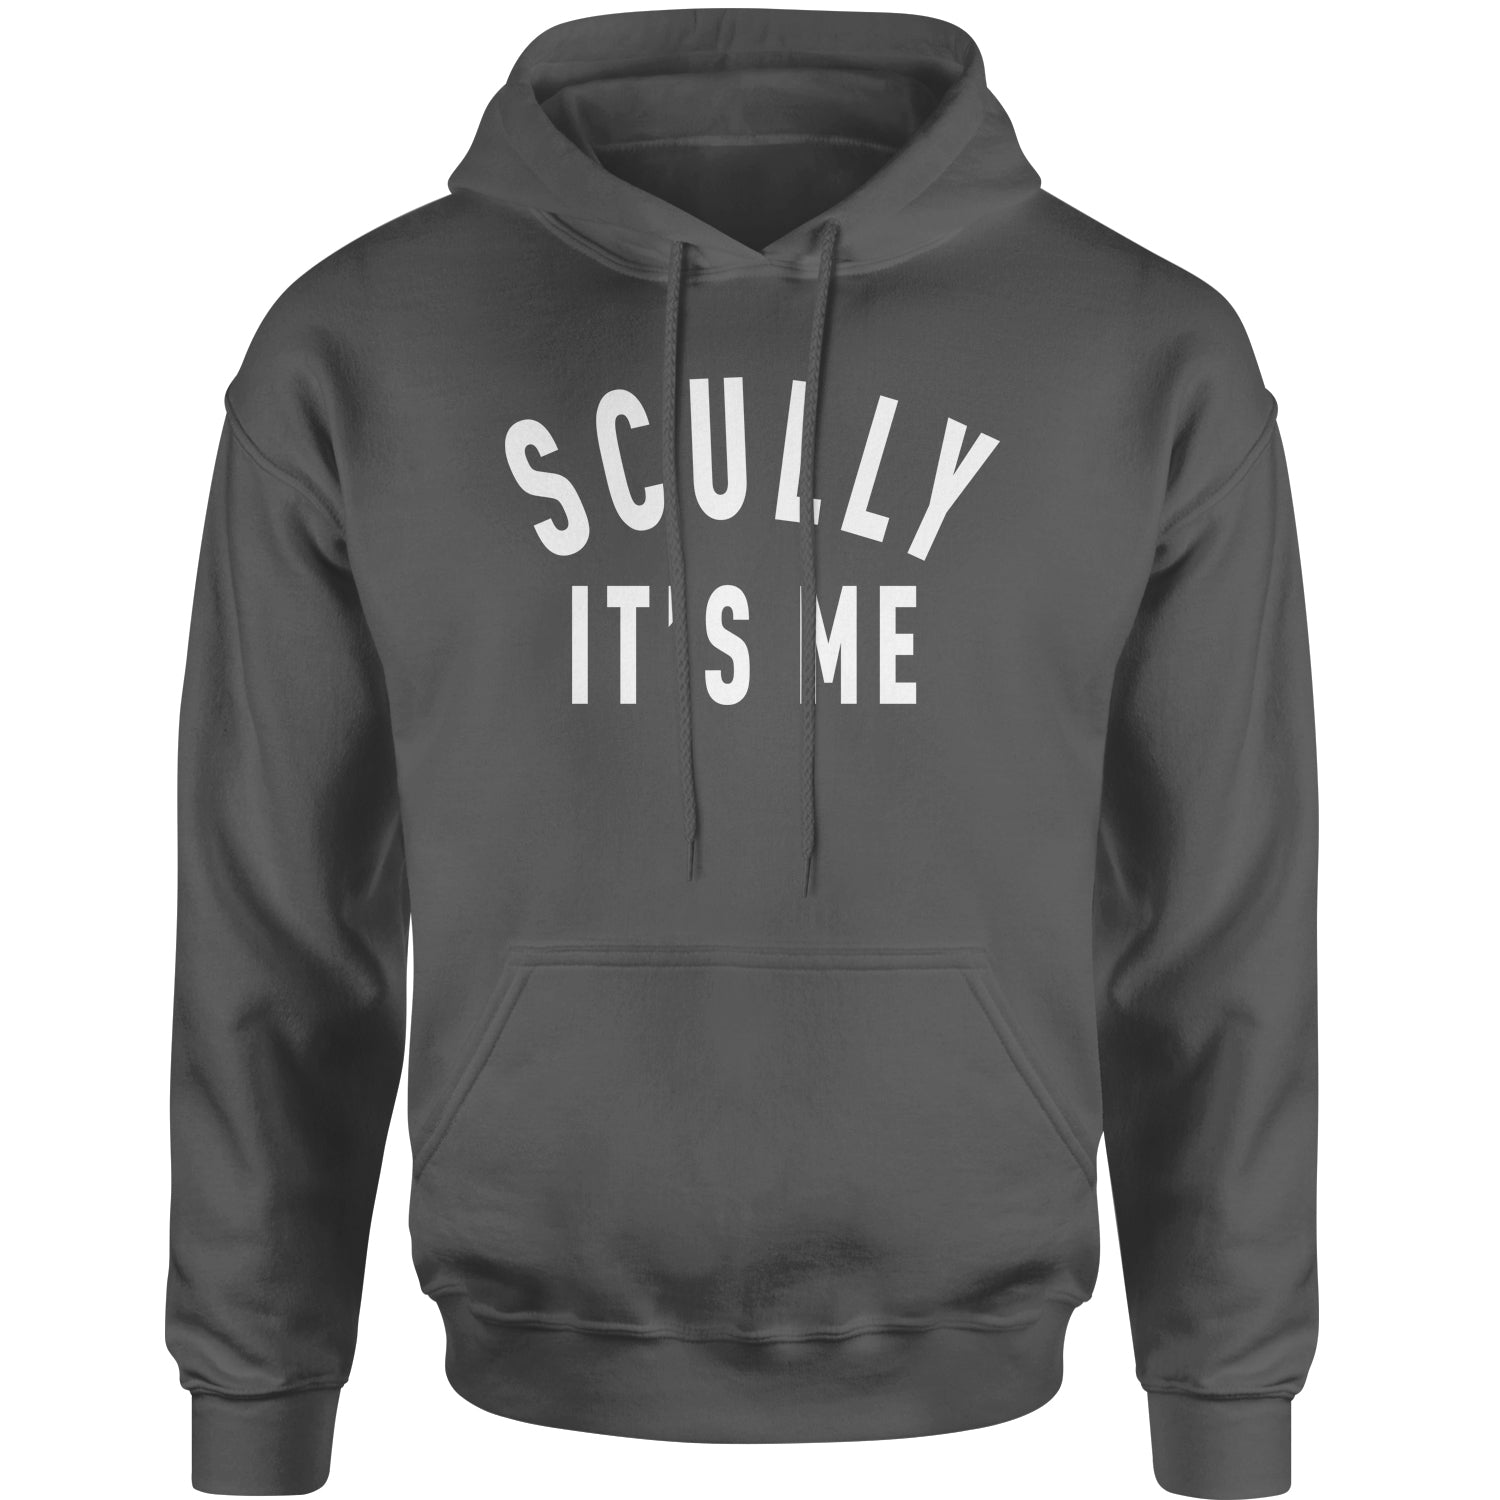 Scully, It's Me Adult Hoodie Sweatshirt #expressiontees by Expression Tees